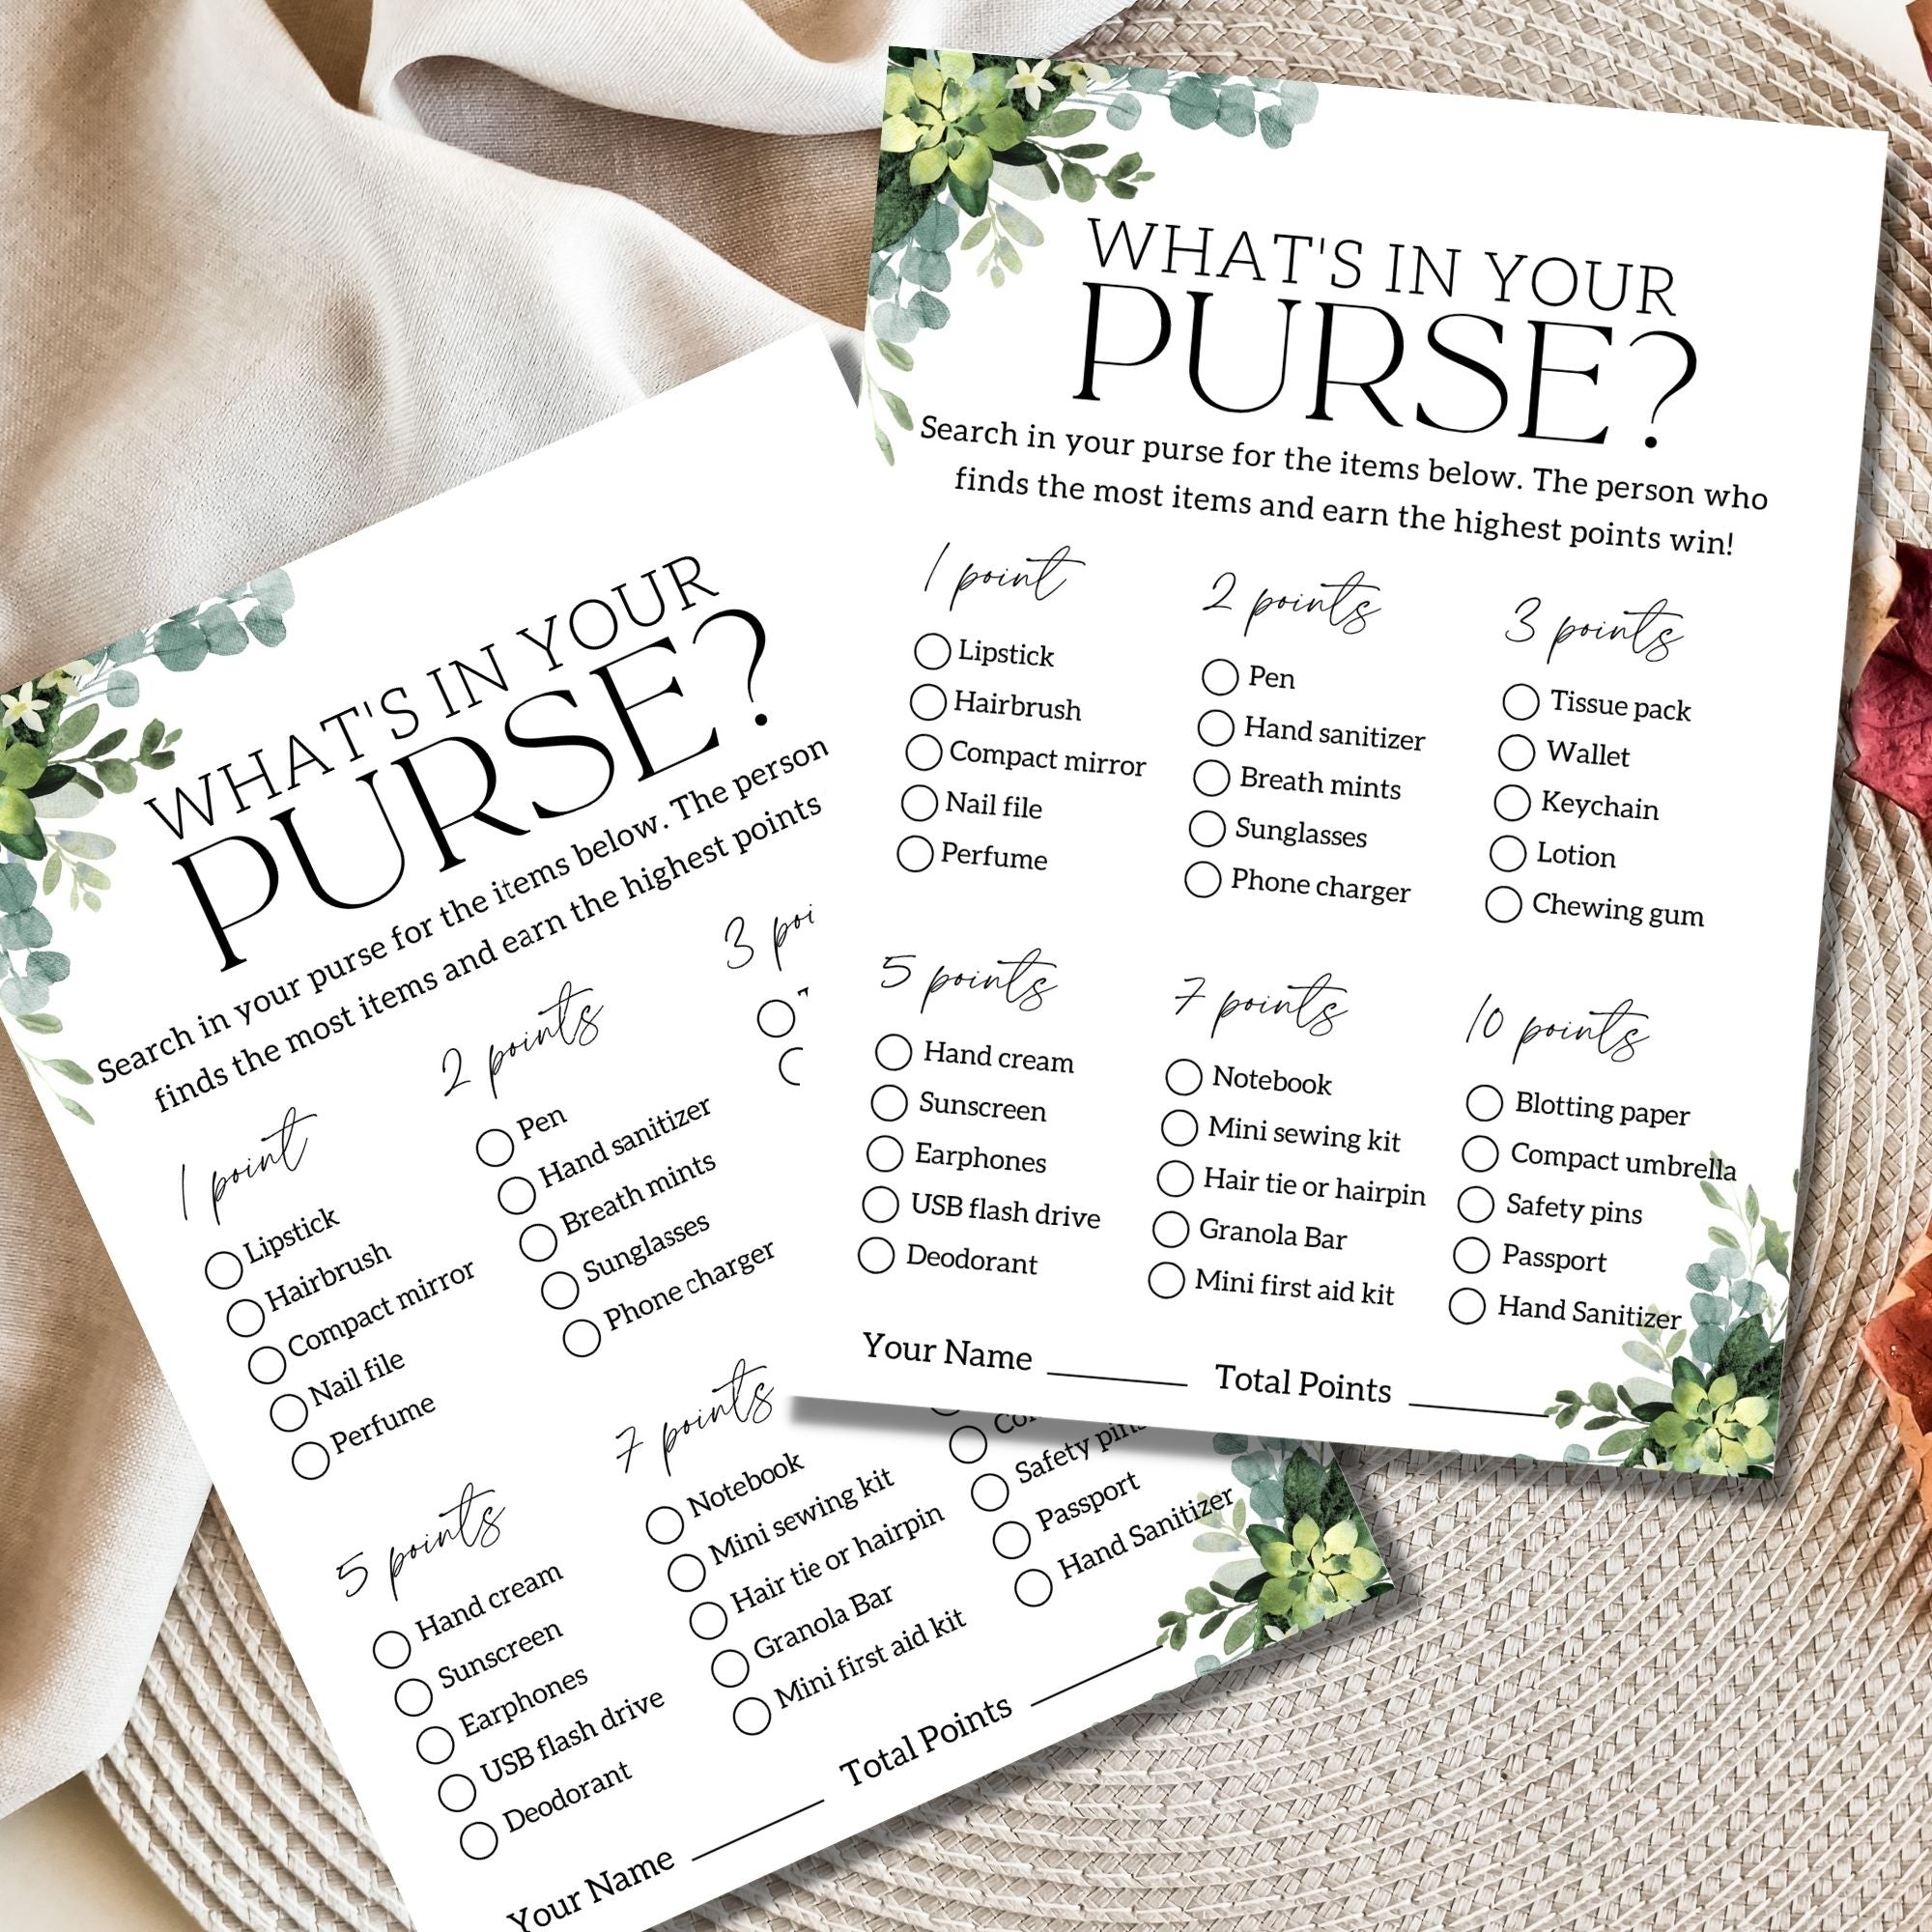 12 Personalized - What's In Your Purse - Bridal Shower Game - Party Games |  eBay